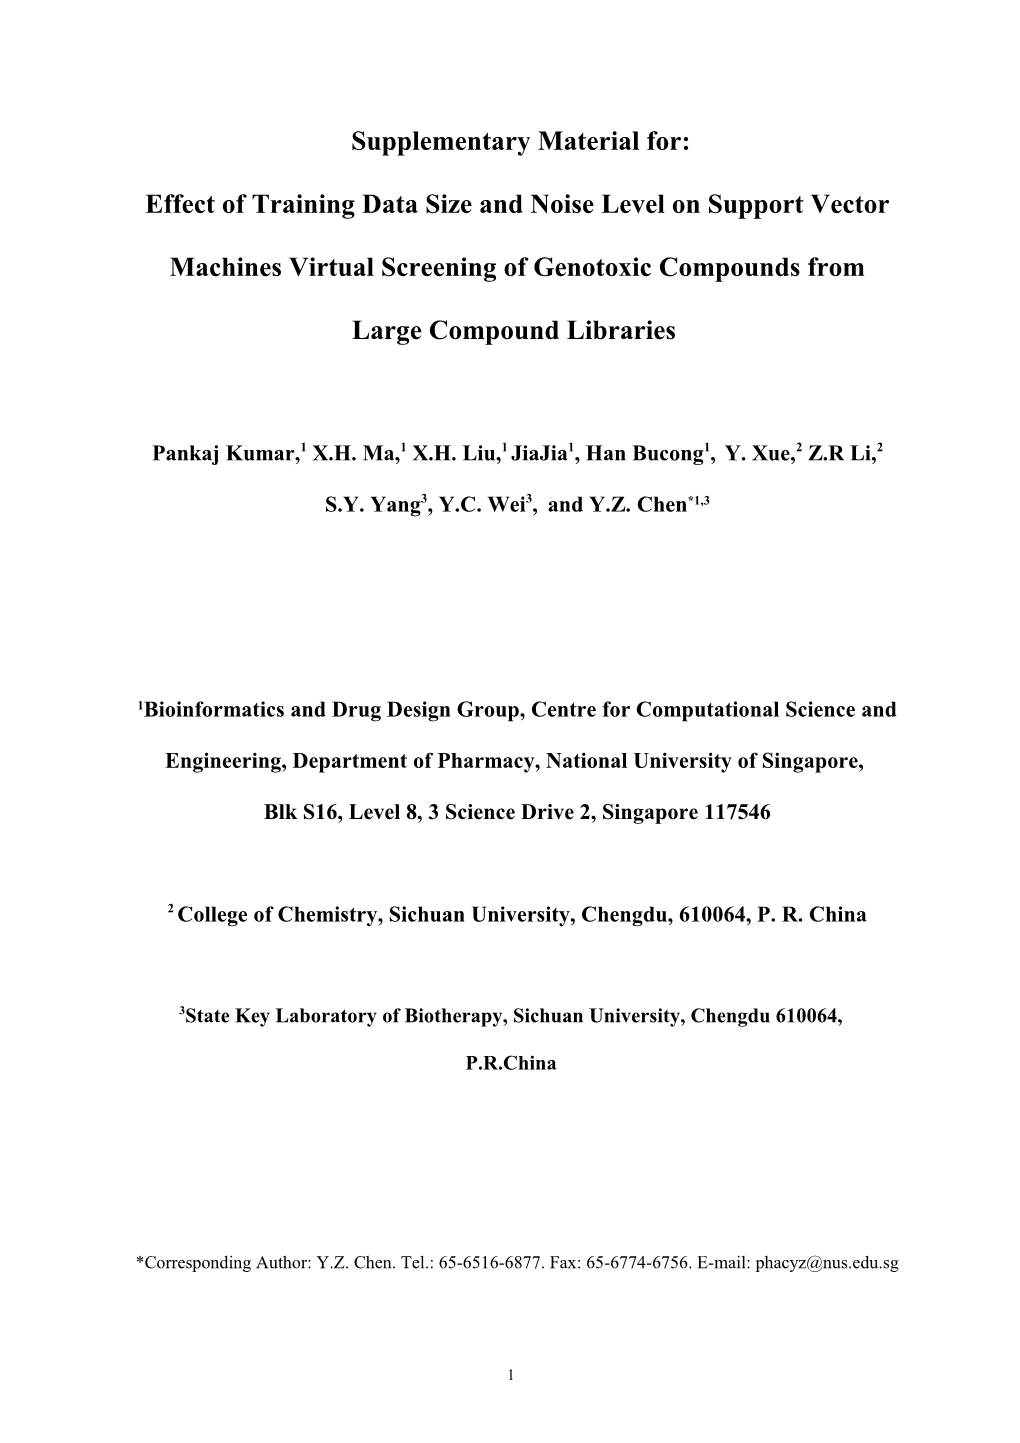 Prediction of Compounds with Specific Pharmacodynamic, Pharmacokinetic Or Toxicological